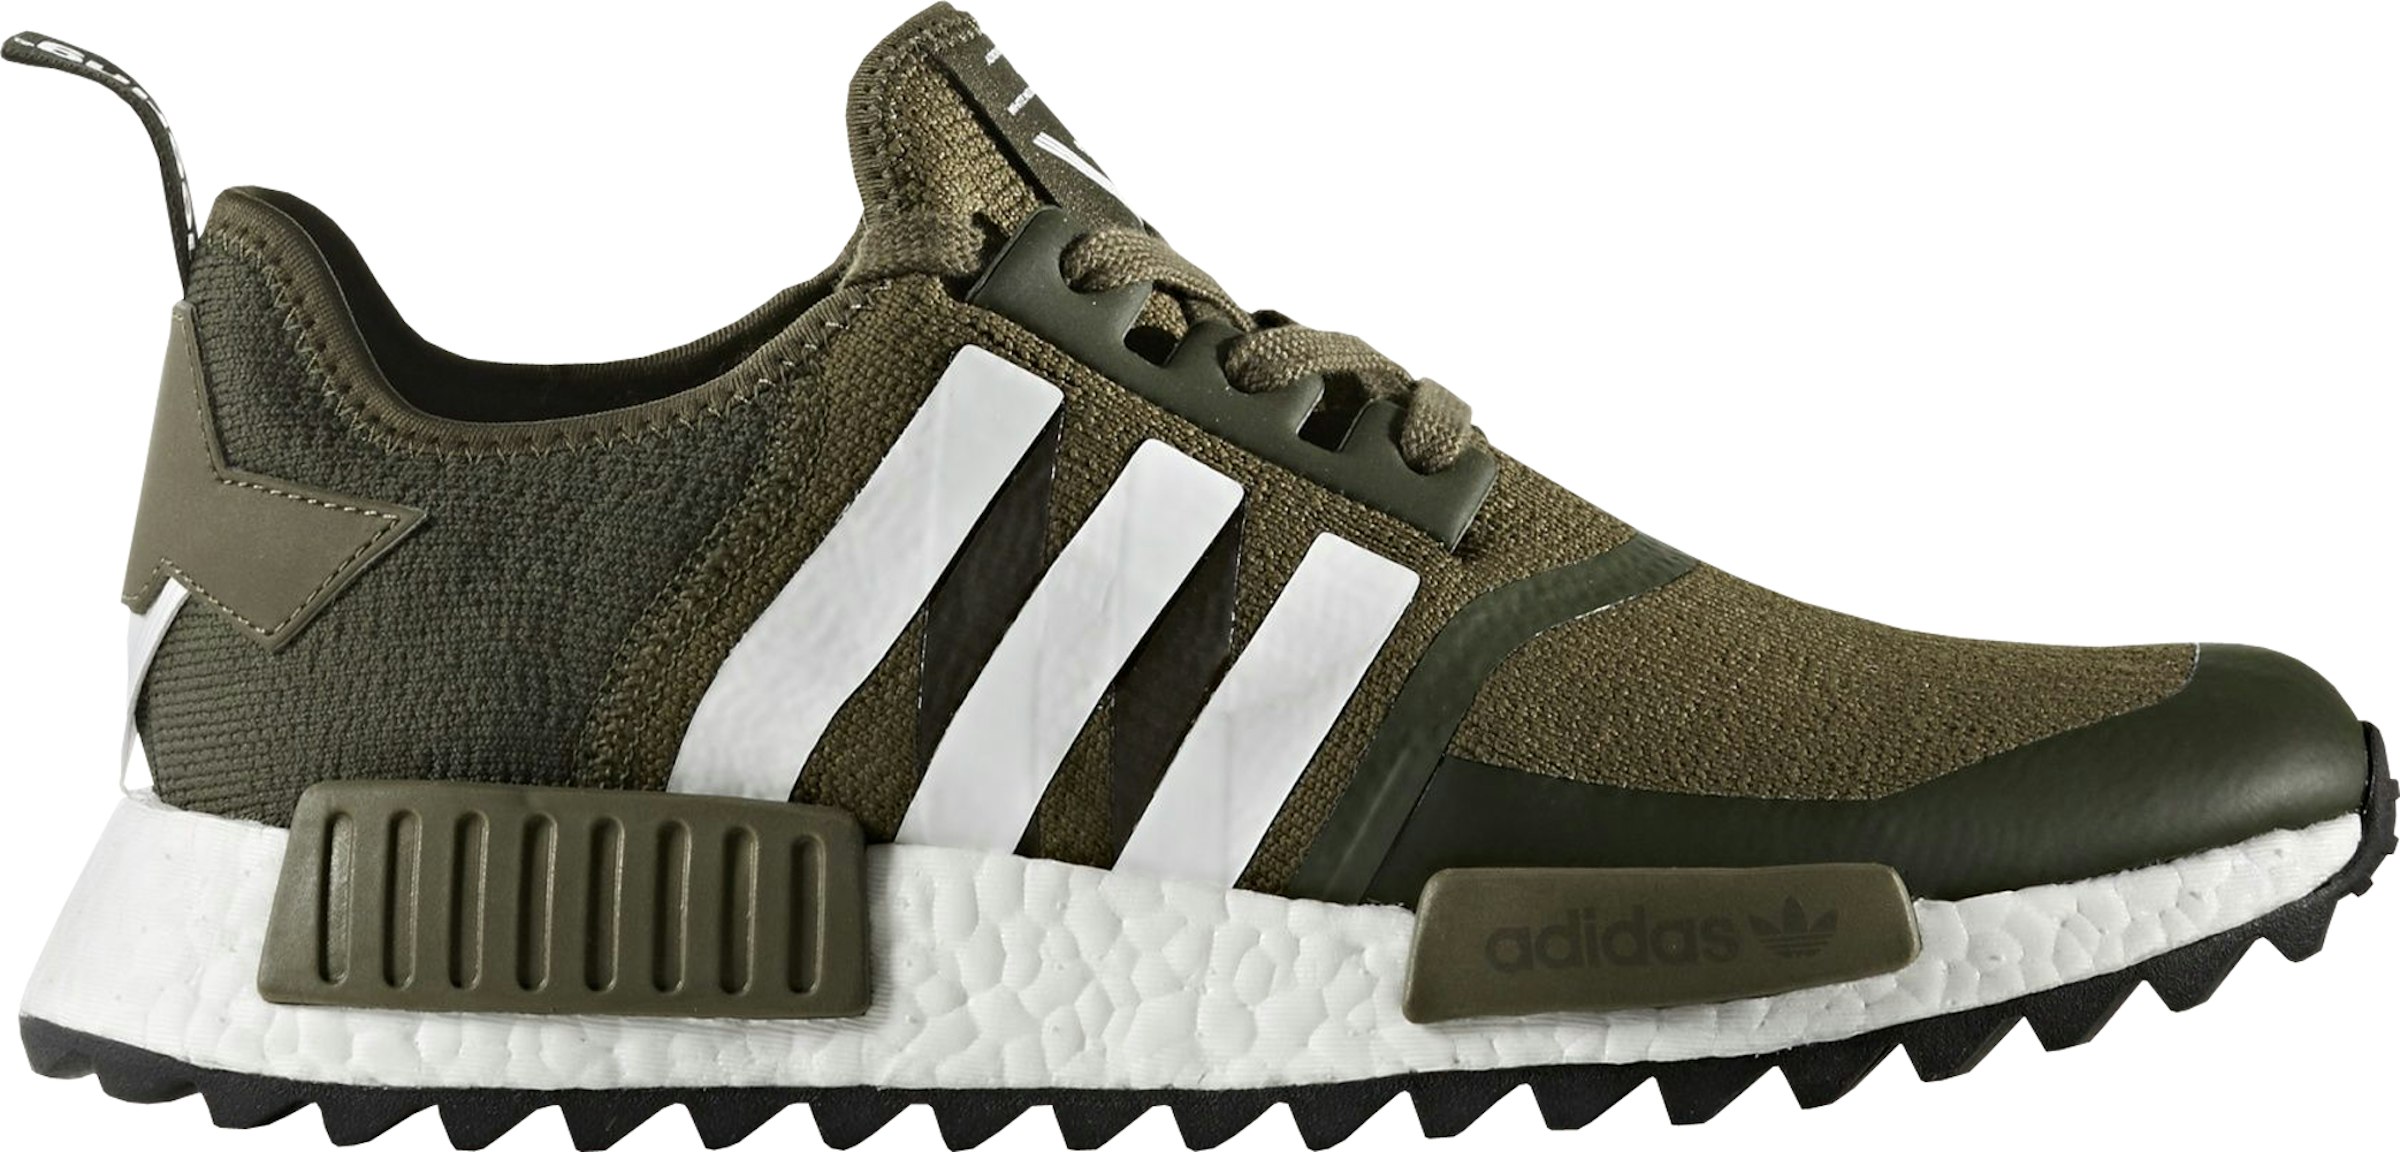 NMD R1 Trail White Mountaineering Trace Olive Men's - CG3647 - US